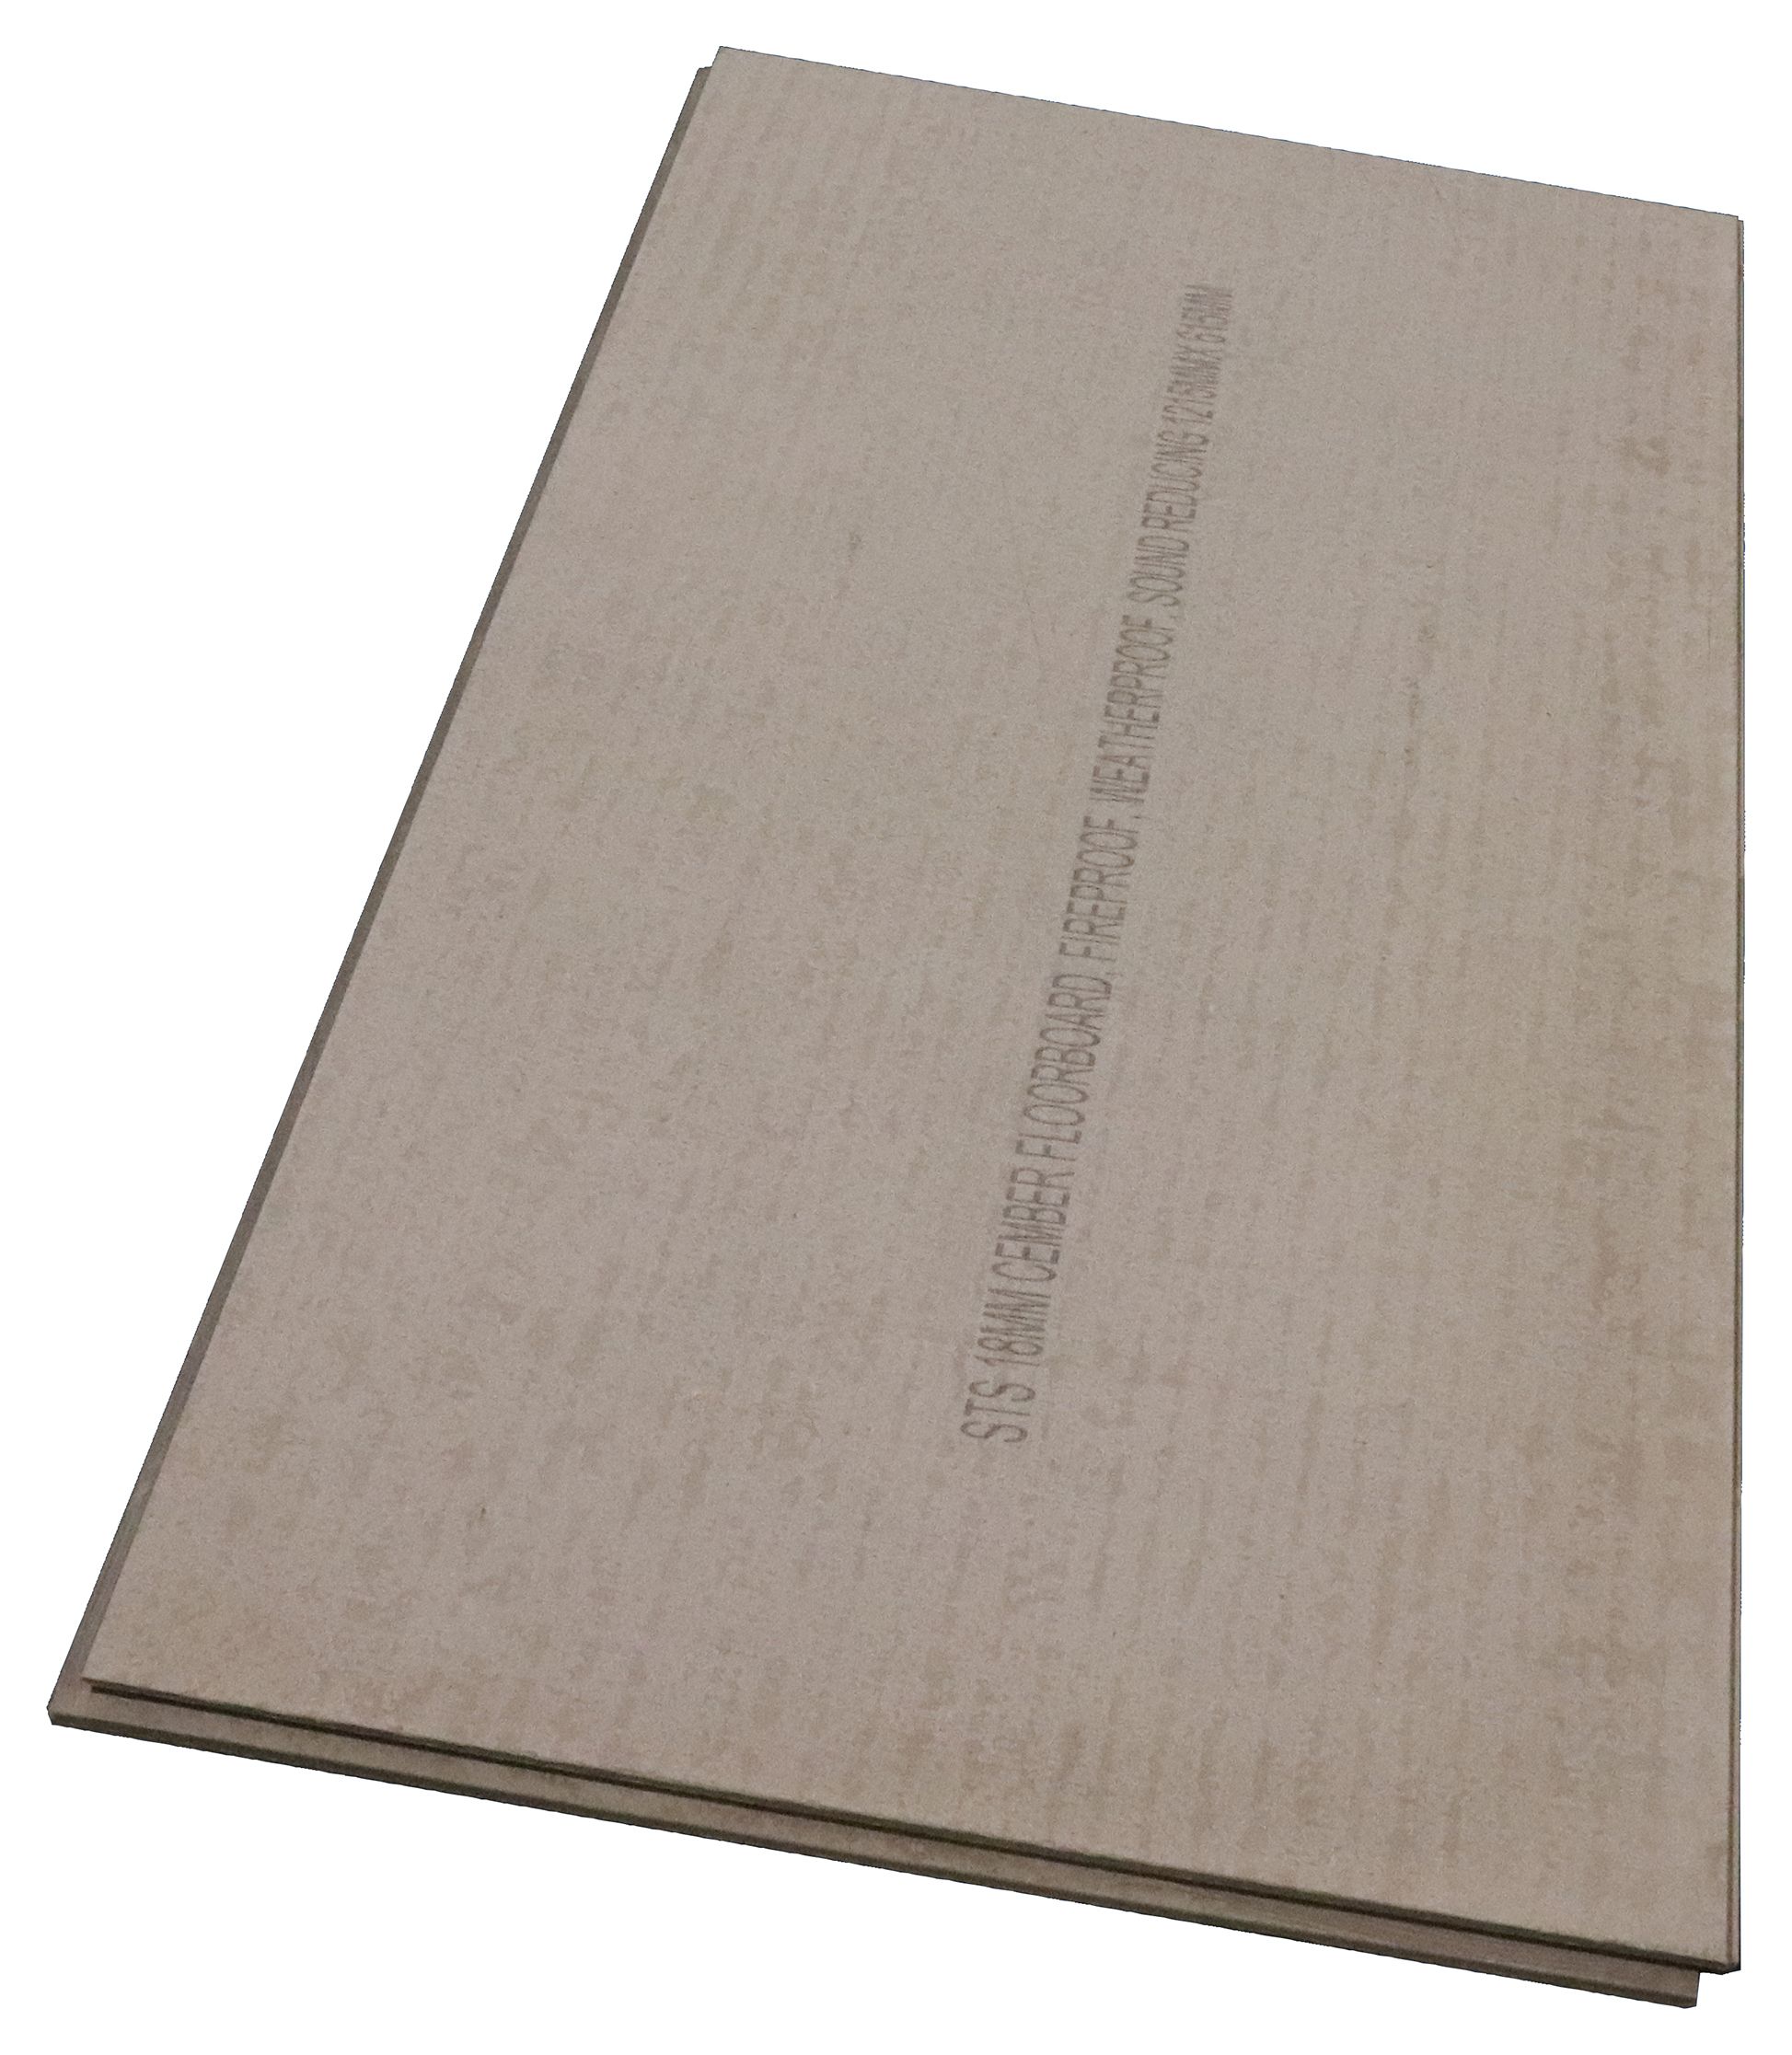 Image of STS NoMorePly TG4 Tile Backer Floor Board 1200 x 600 x 18mm - Pack of 50